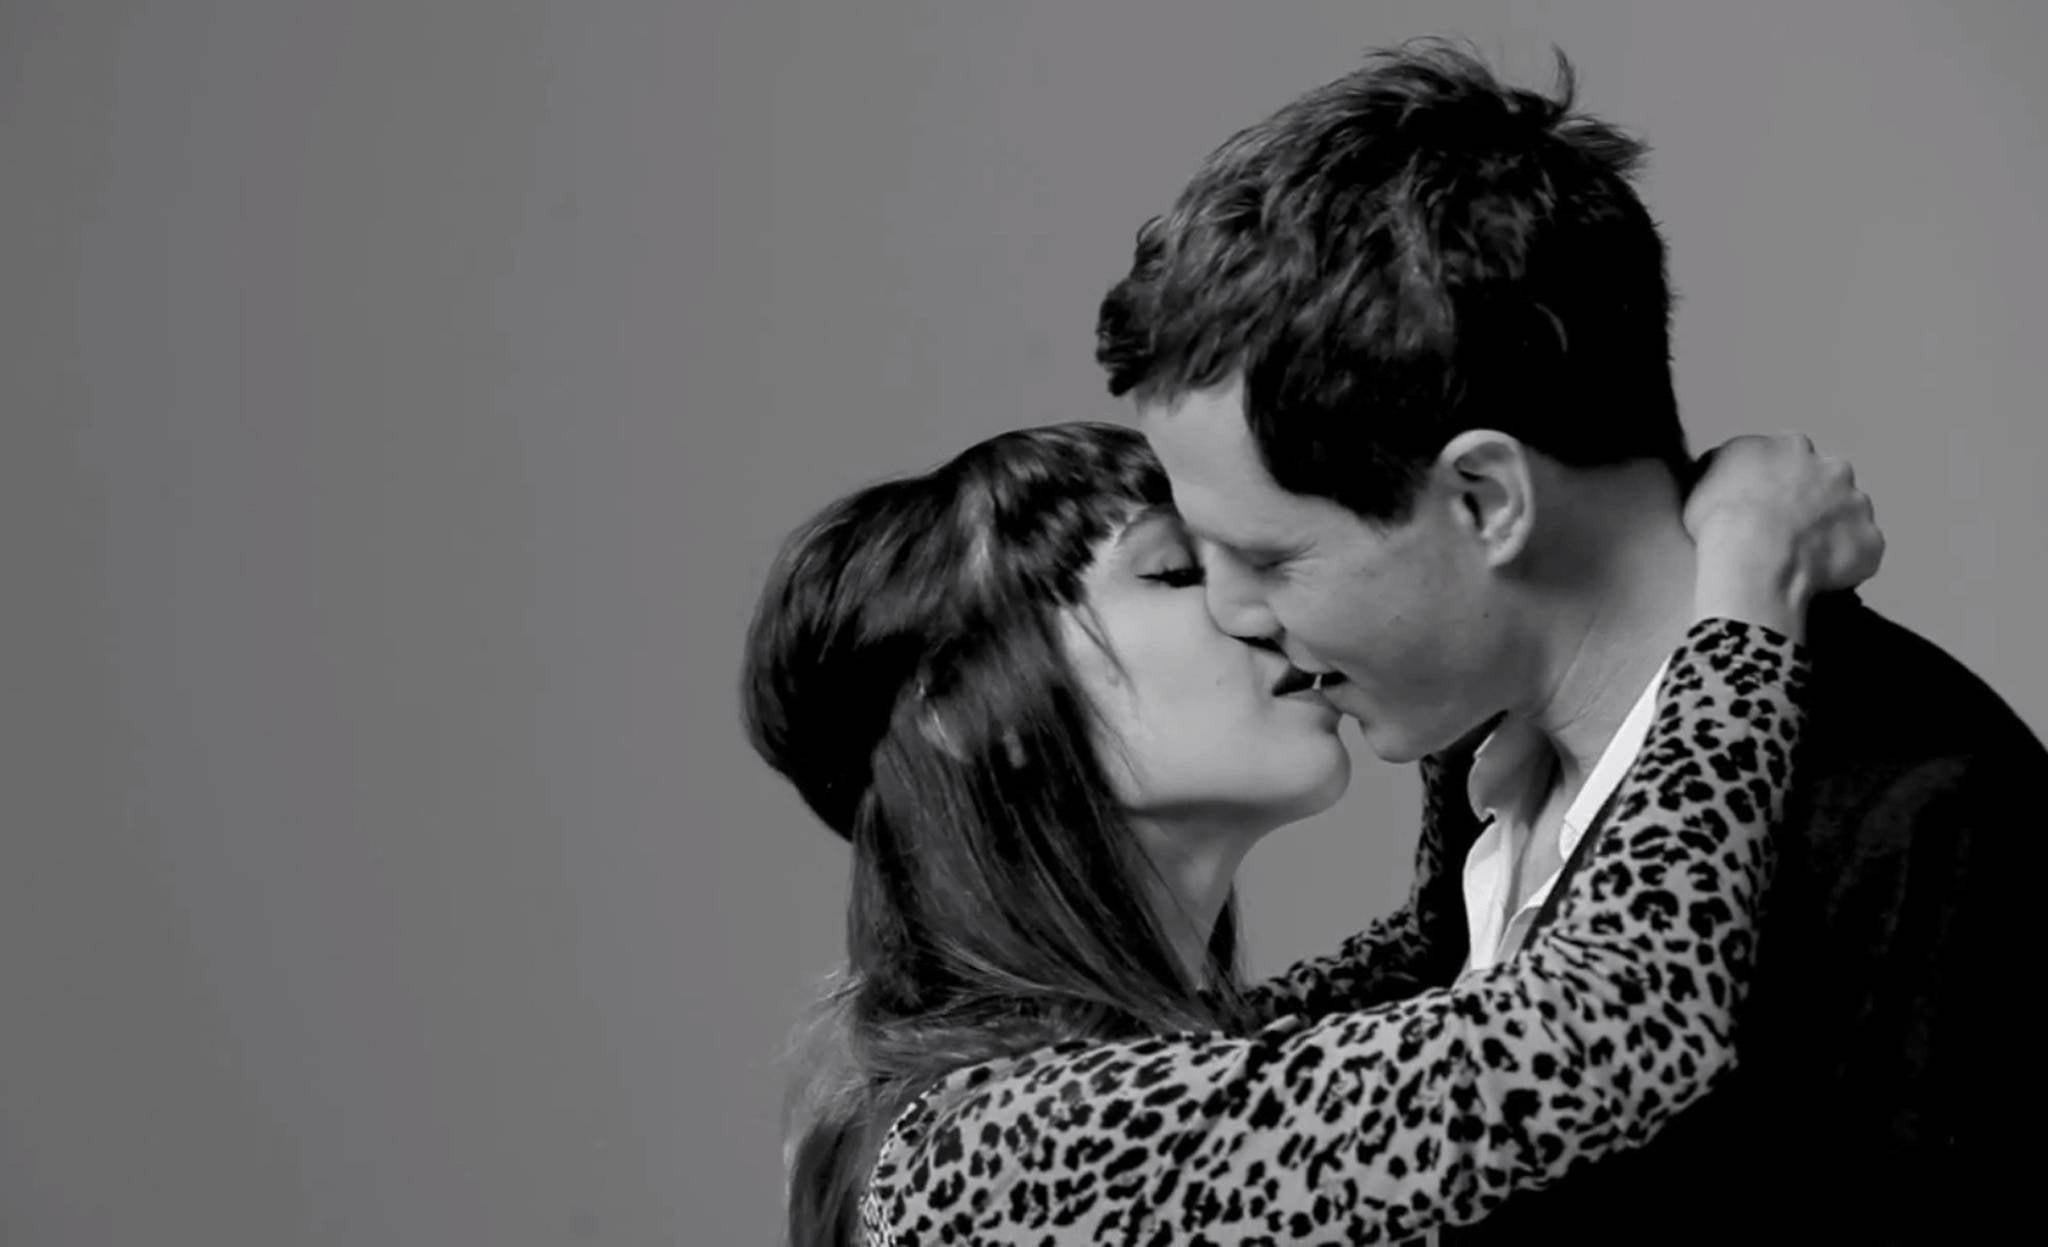 Ten pairs took part in the mass kissing video